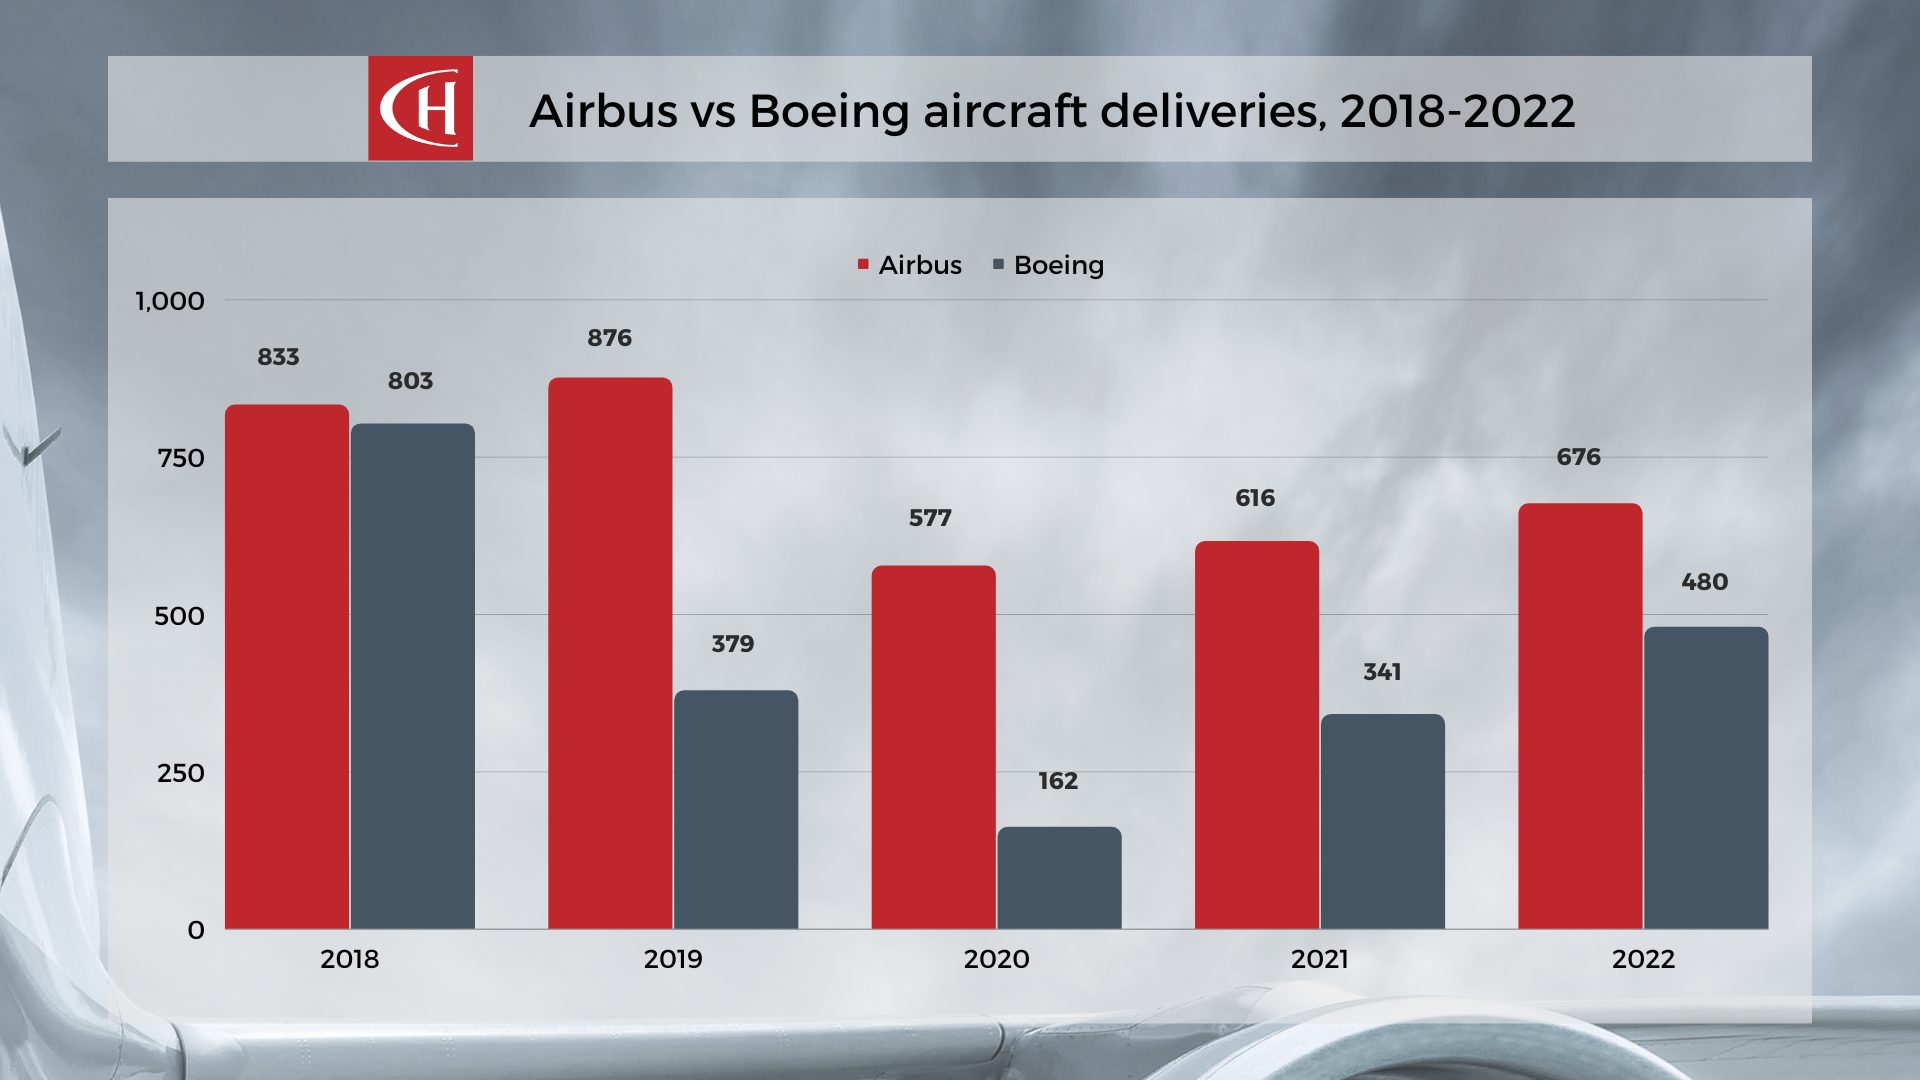 Ch Aviation Report Airbus Vs Boeing Deliveries 2022